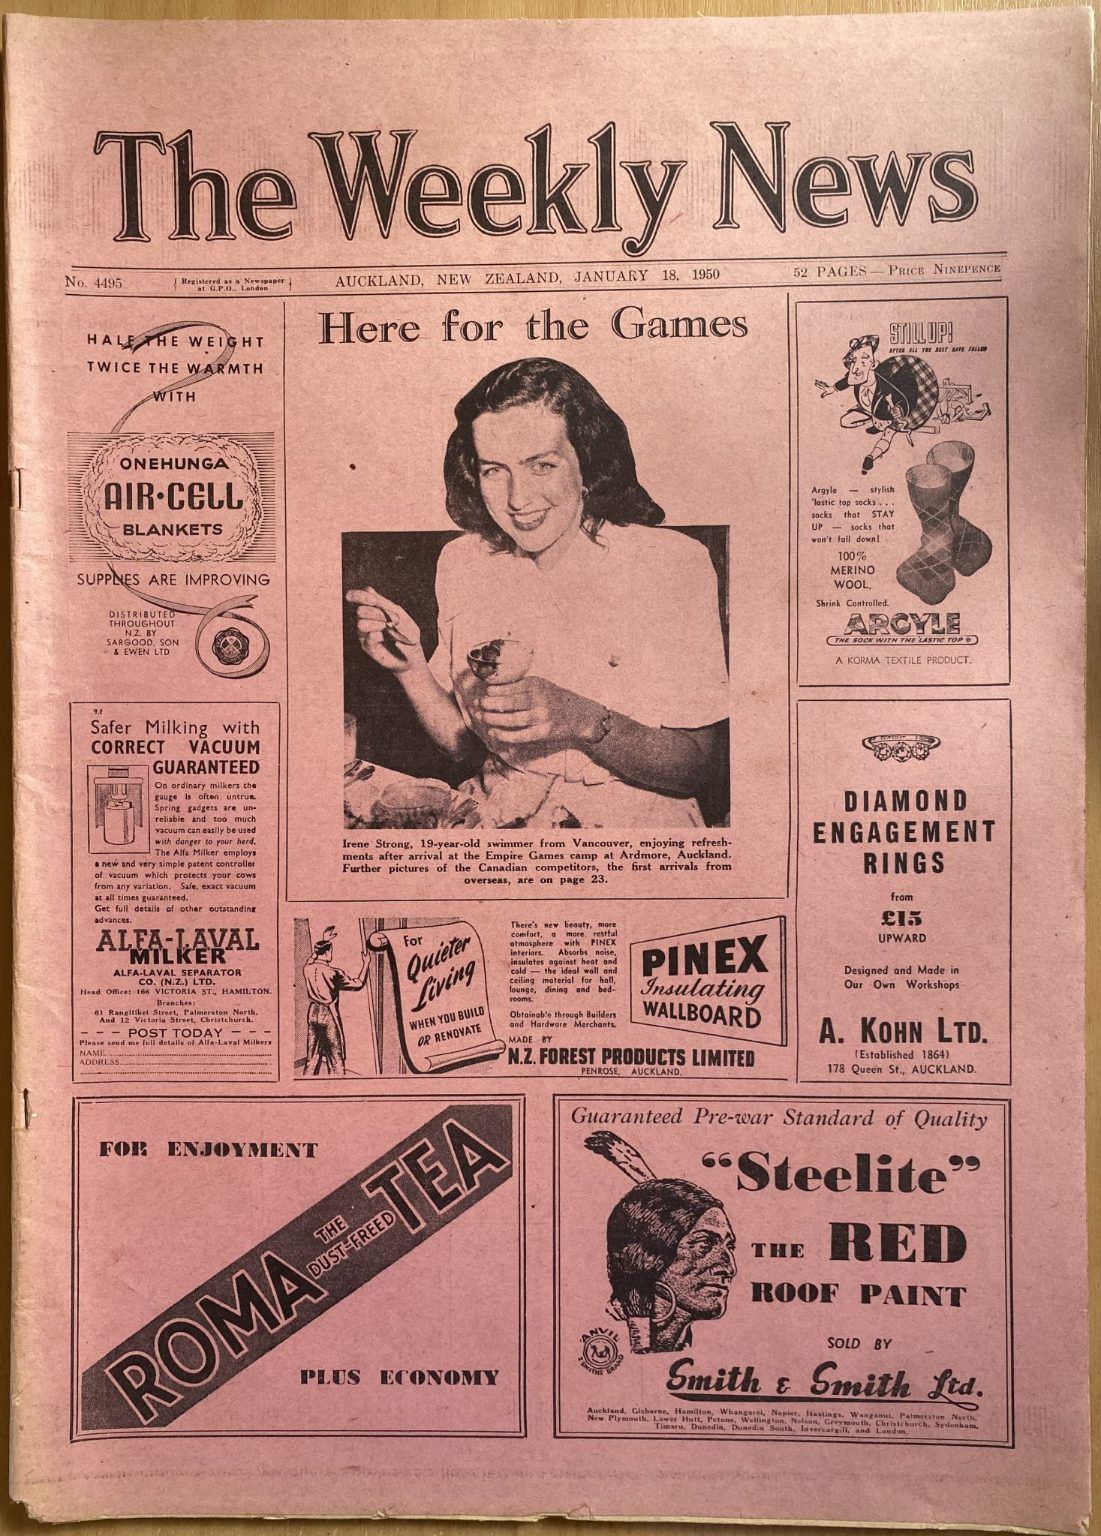 OLD NEWSPAPER: The Weekly News, No. 4495, 18 January 1950